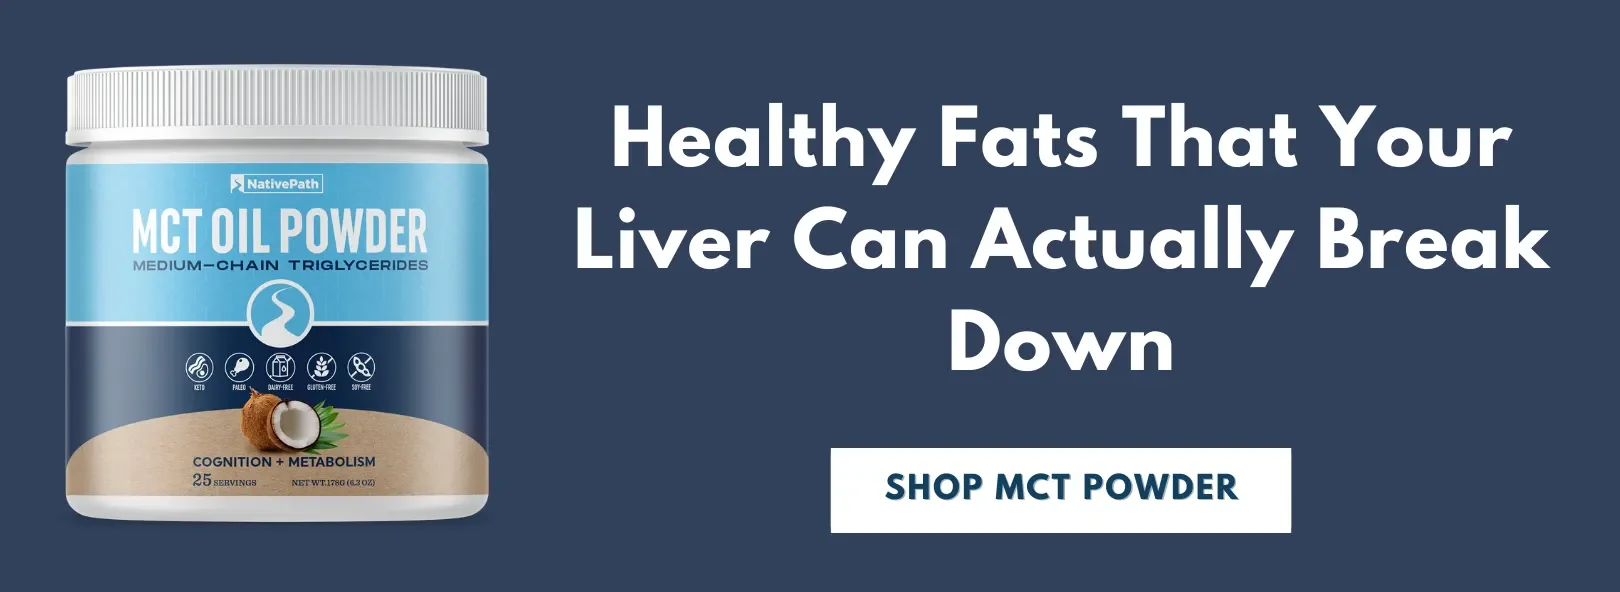 Healthy Fats That Your Liver Can Actually Break Down: Shop NativePath MCT Powder